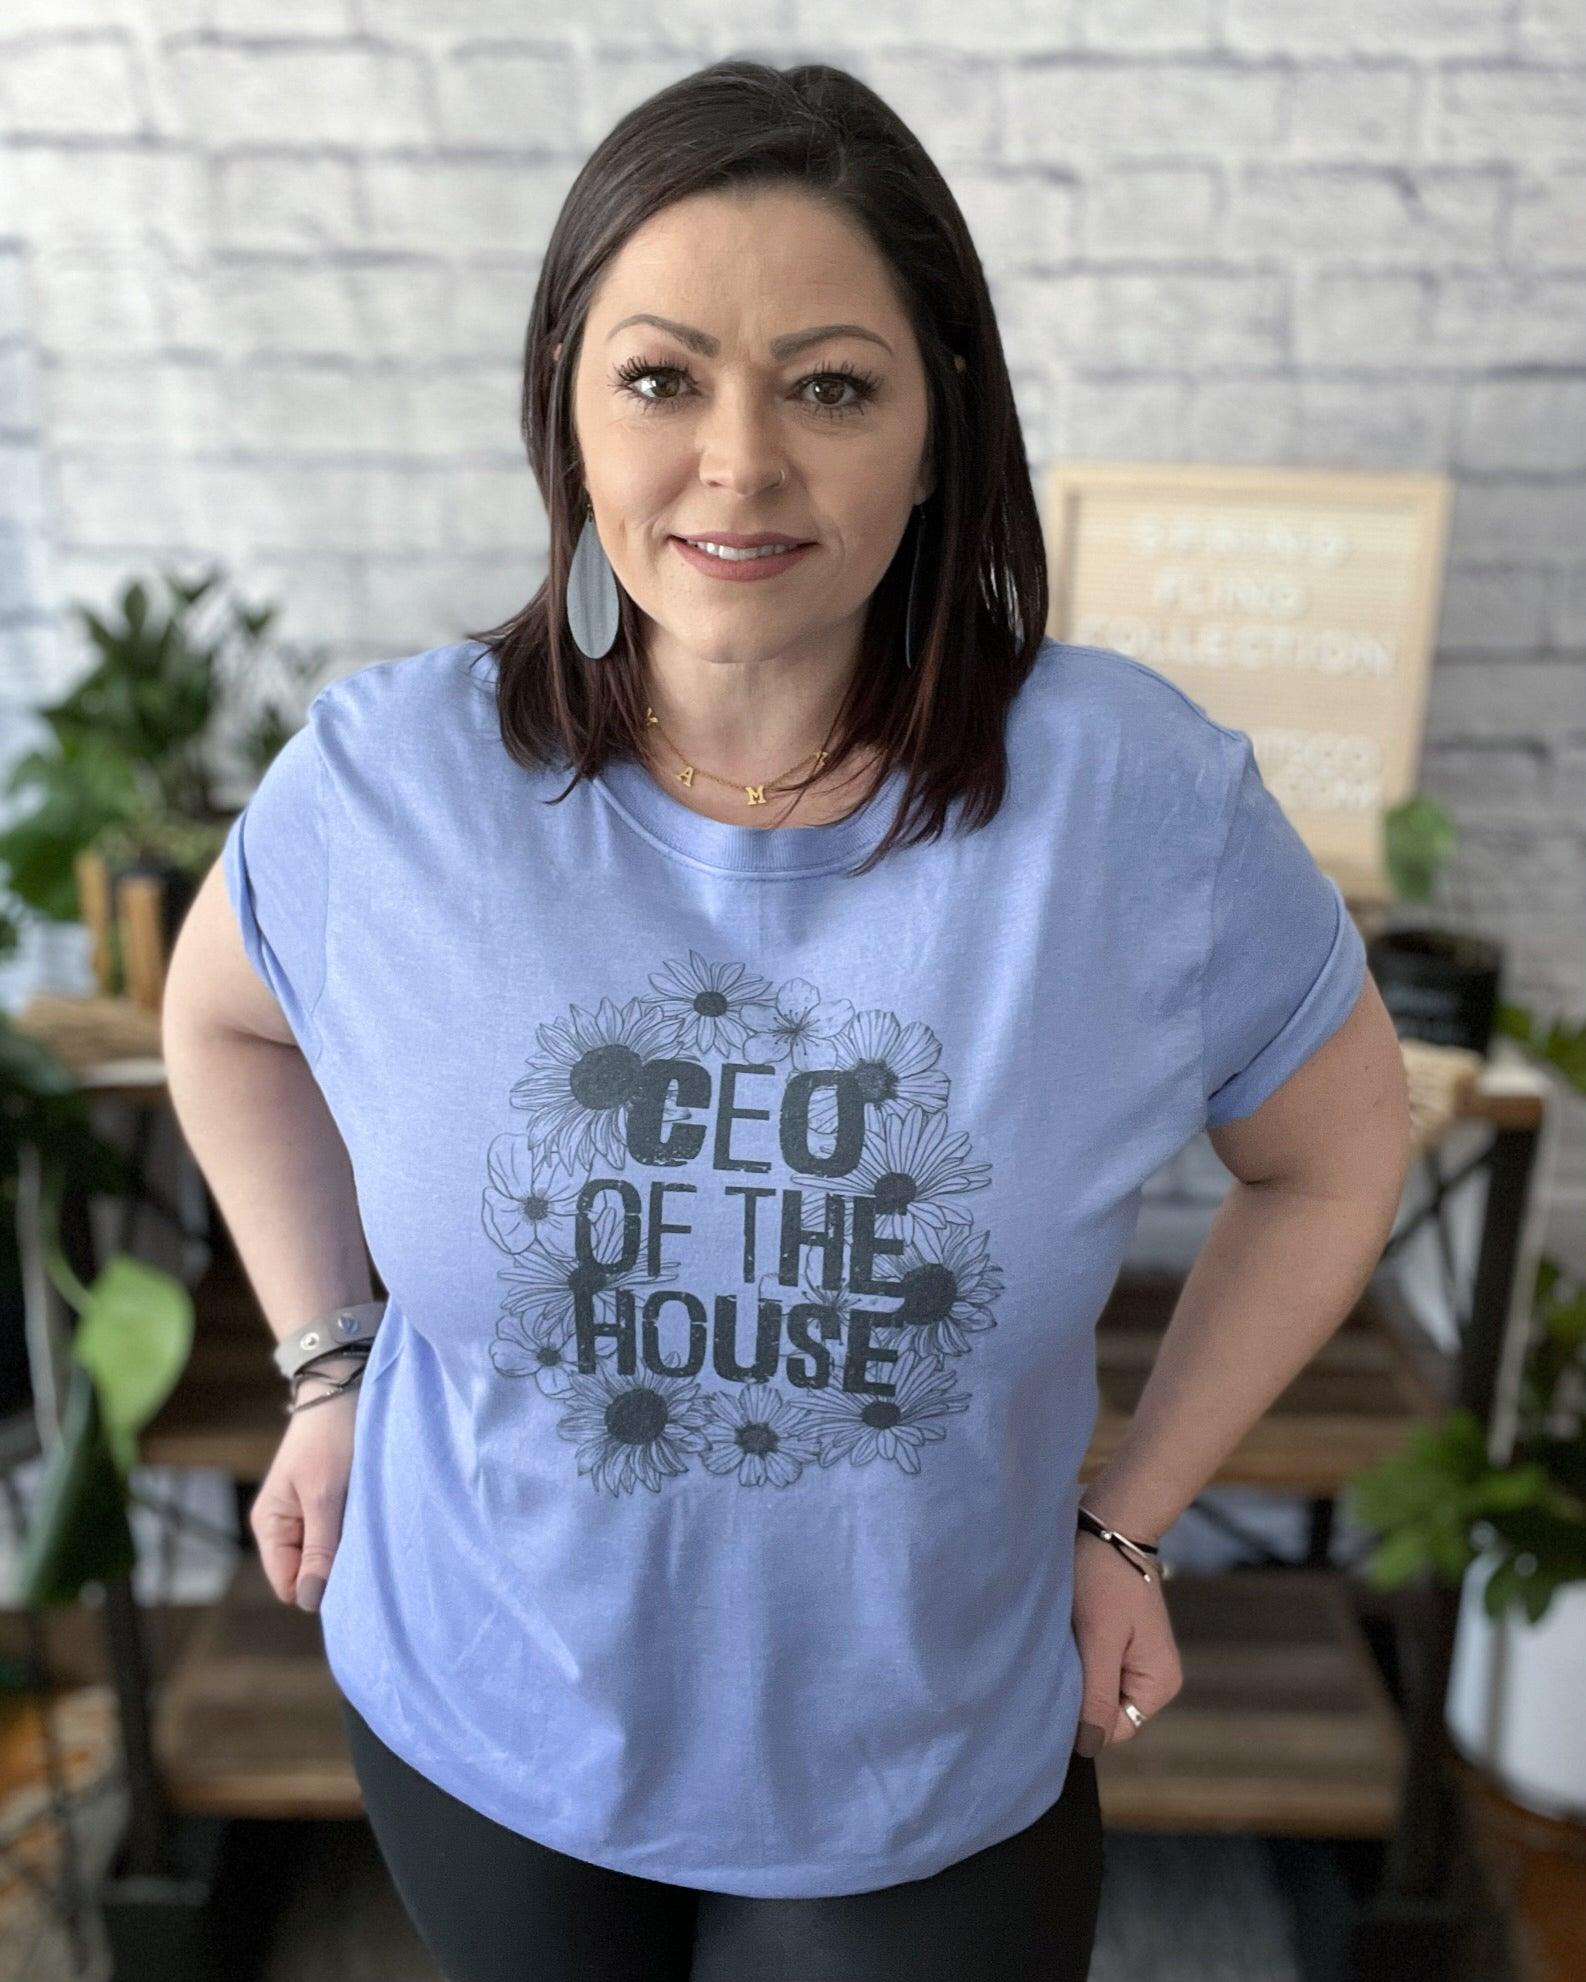 CEO Of The House - Women's shirts -  Rustic Cuts